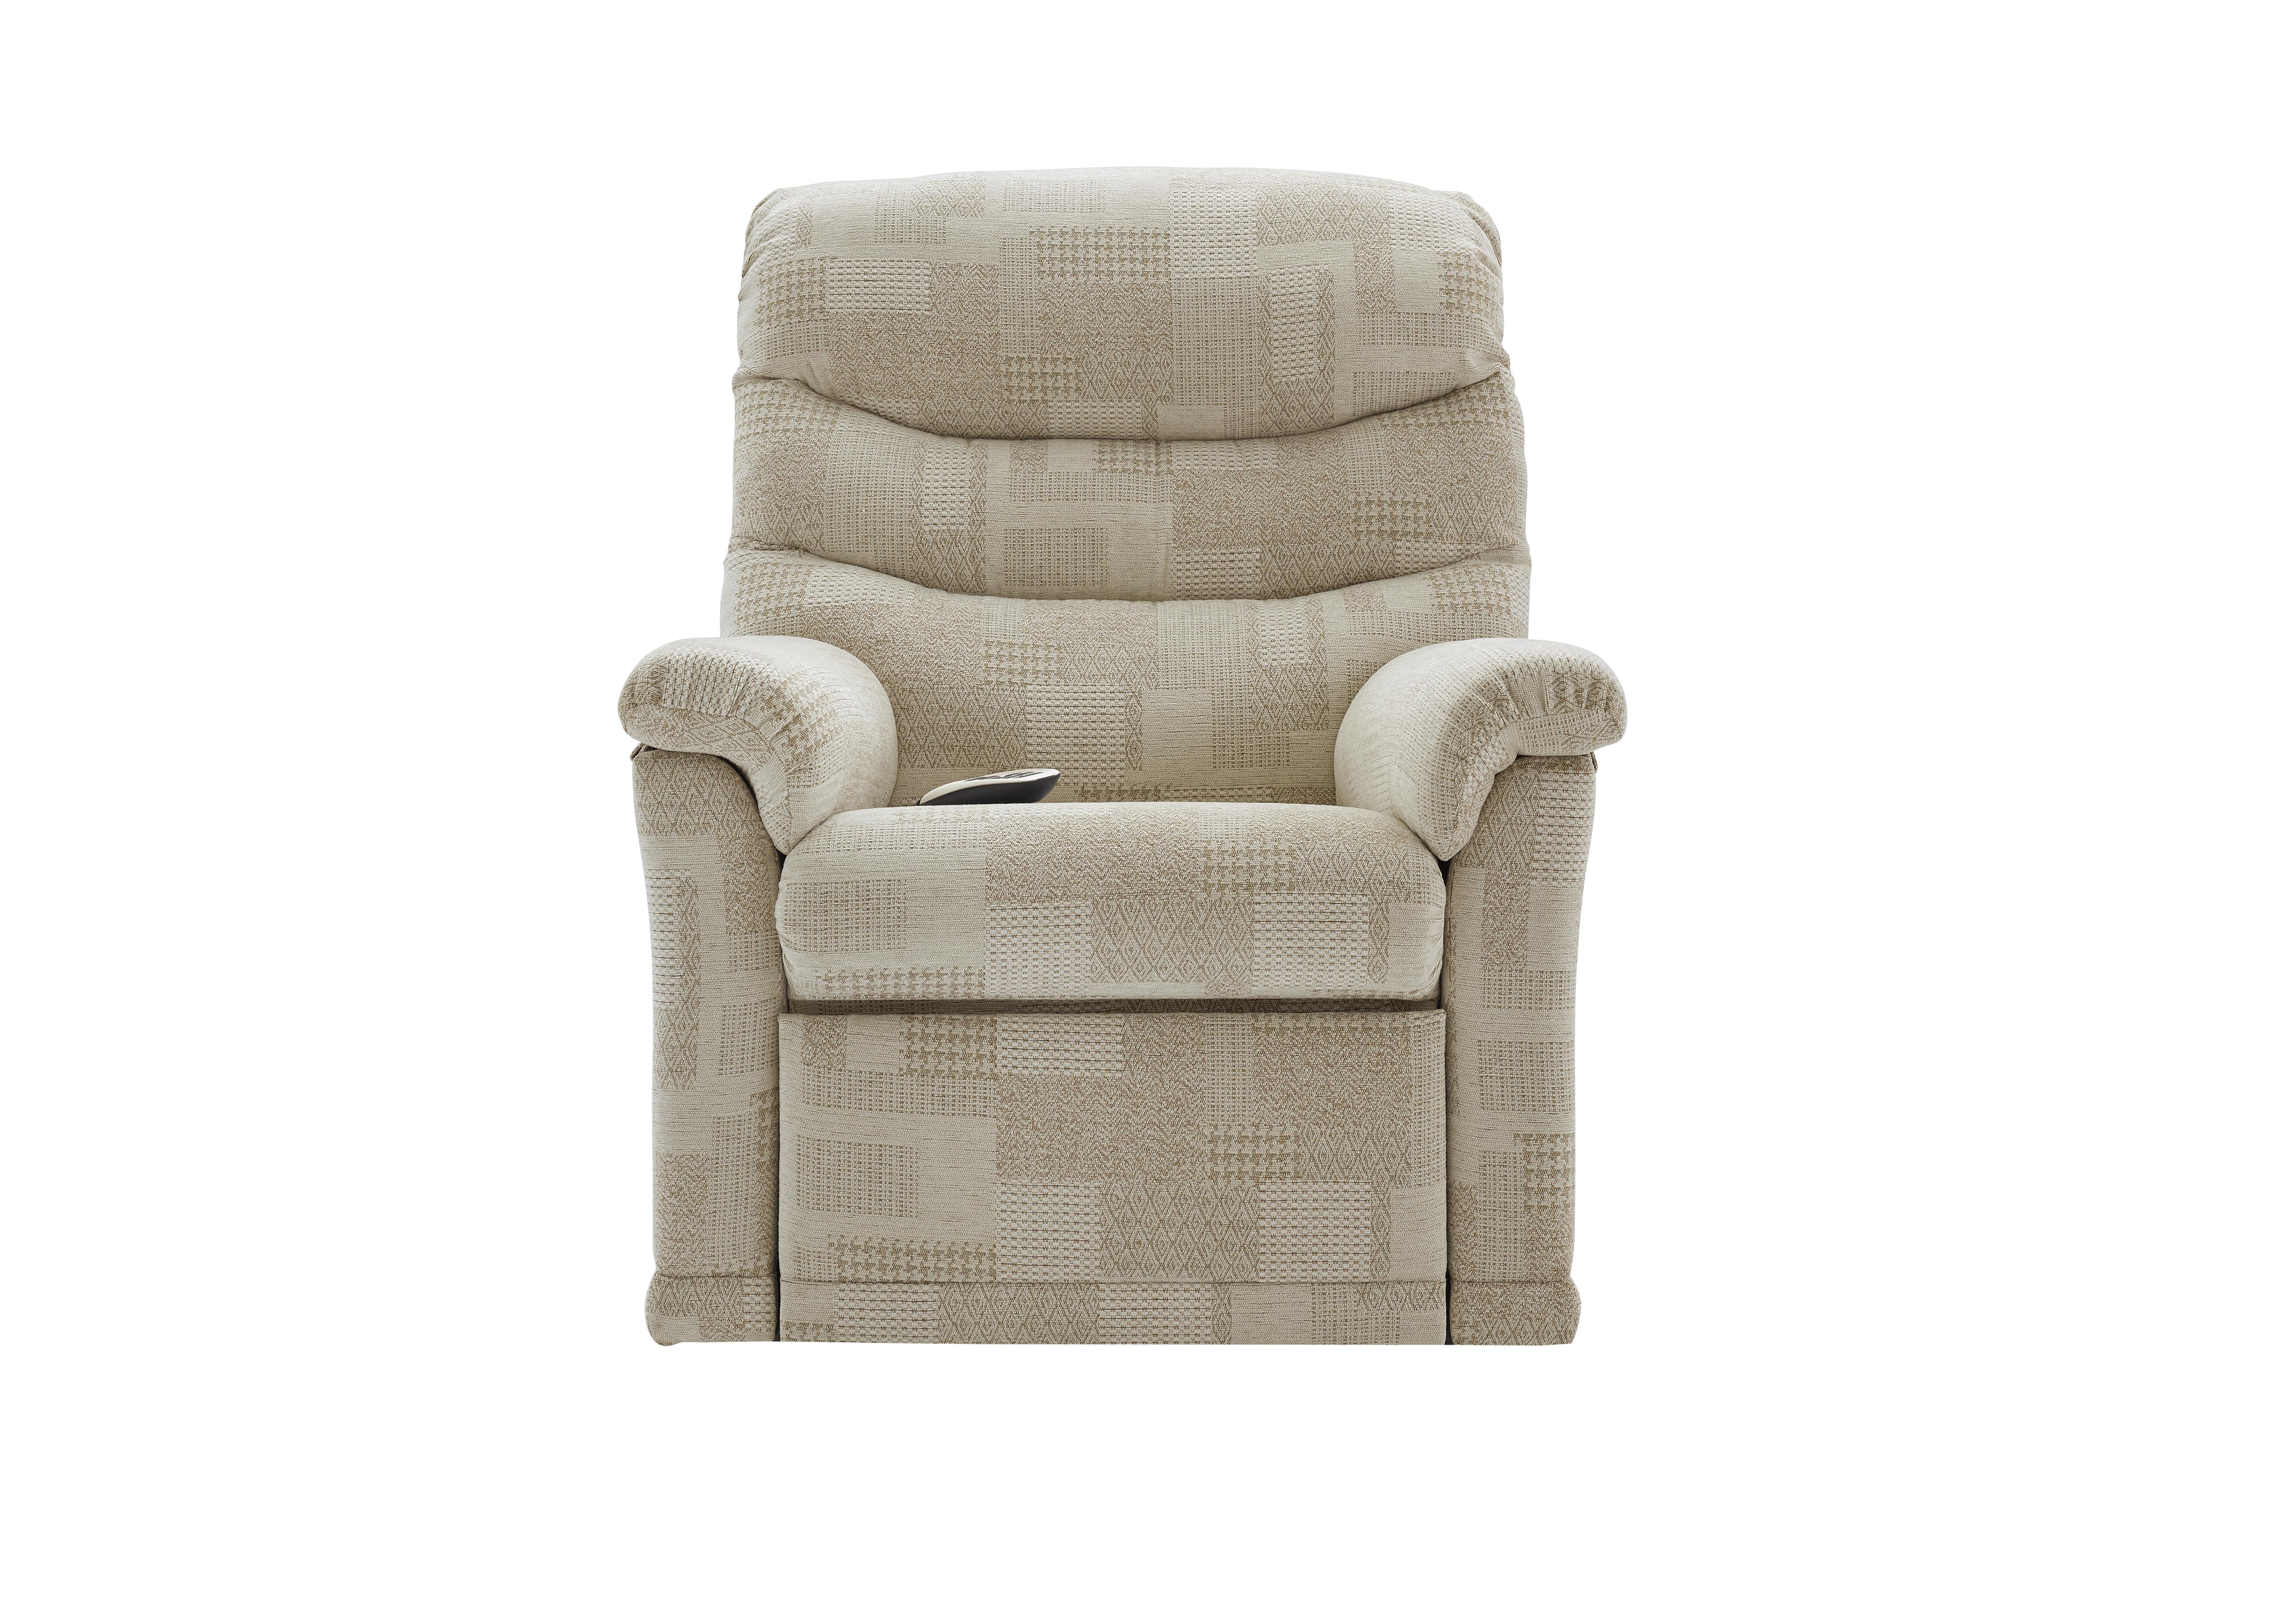 Malvern Fabric Small Rise and Recline Armchair in B430 Lydia Multi on Furniture Village